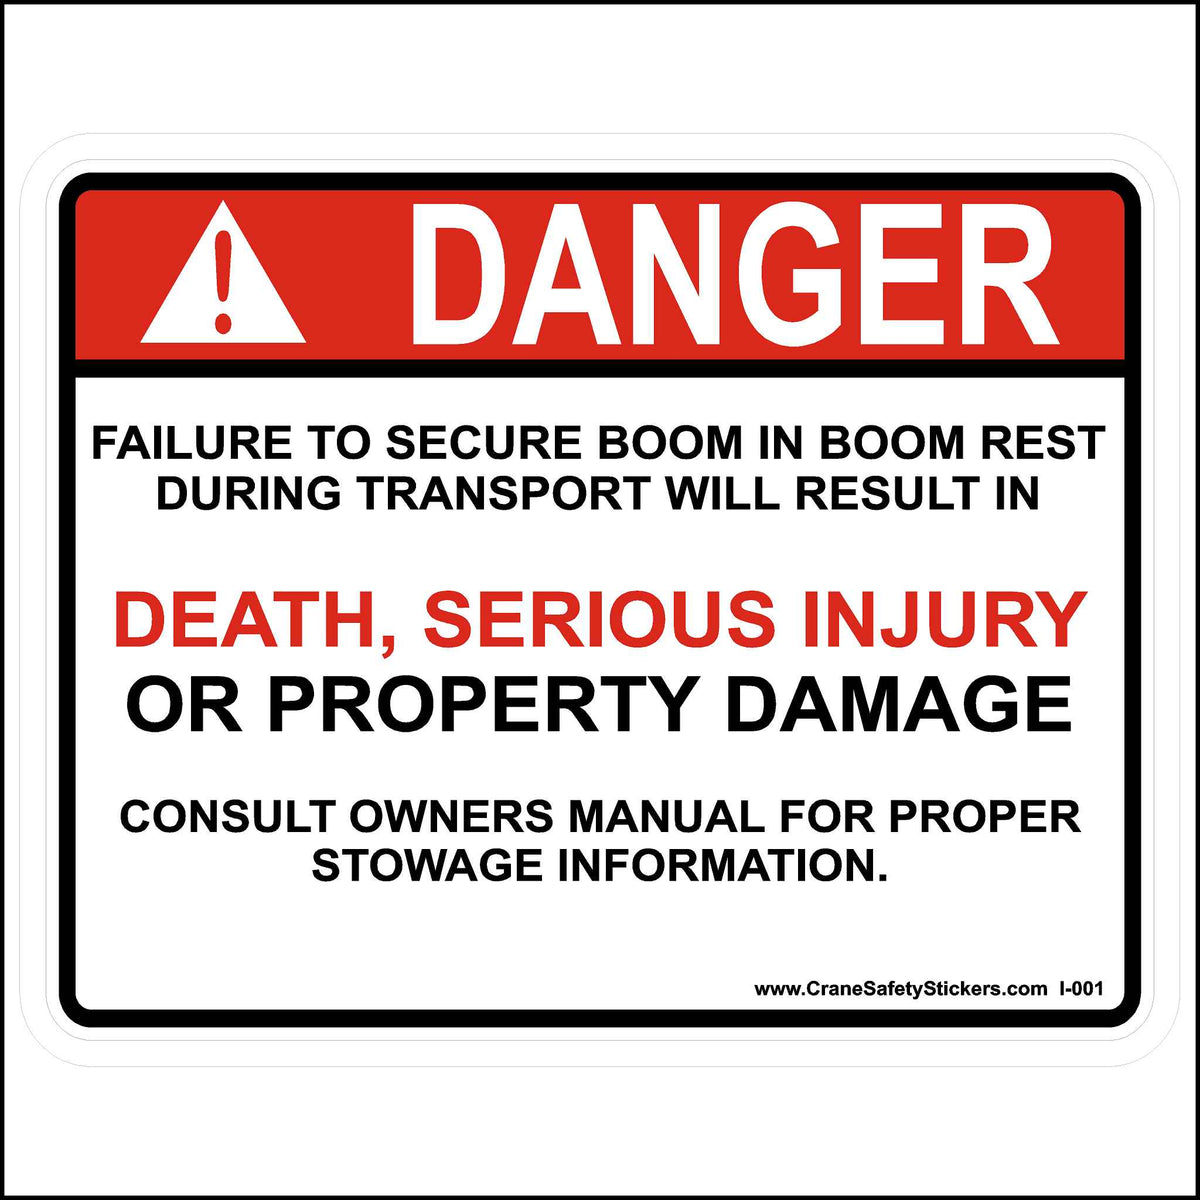 DANGER Failure To Secure Boom Sticker Printed With. FAILURE TO SECURE BOOM IN BOOM REST DURING TRANSPORT WILL RESULT IN.  DEATH, SERIOUS INJURY OR PROPERTY DAMAGE.  CONSULT OWNERS MANUAL FOR PROPER STOWAGE INFORMATION.